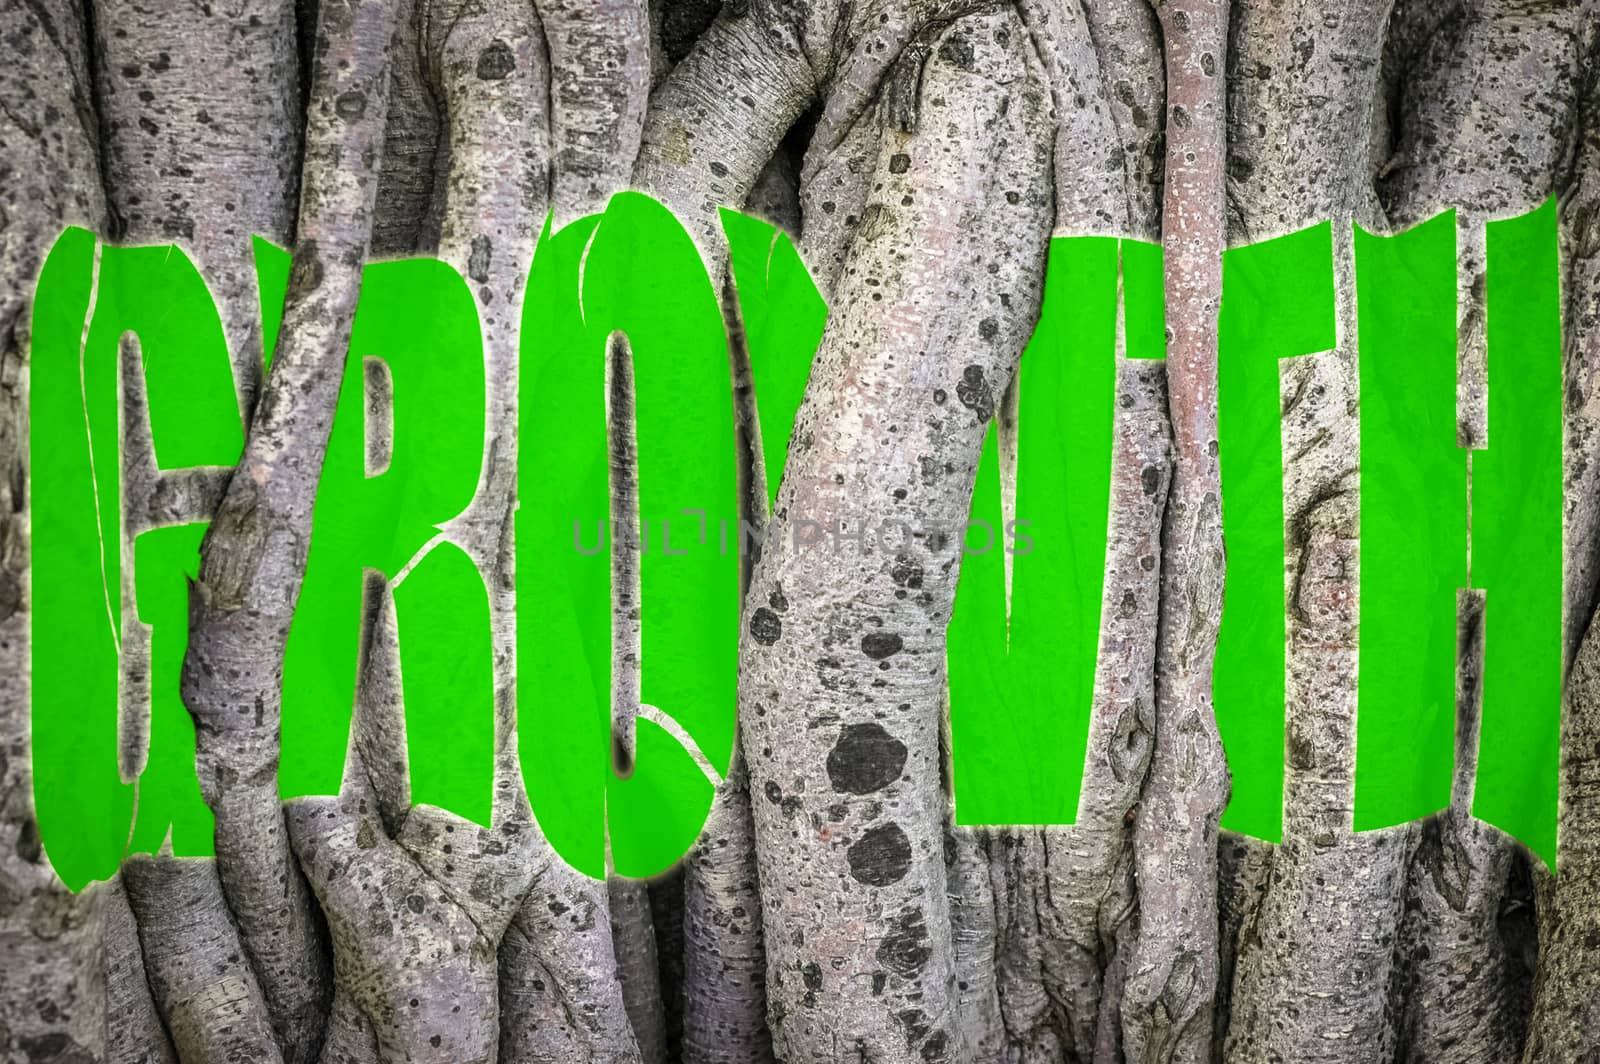 Conceptual Image Of The Word Growth Twisted And Torn Behind The Vines Of A Tree